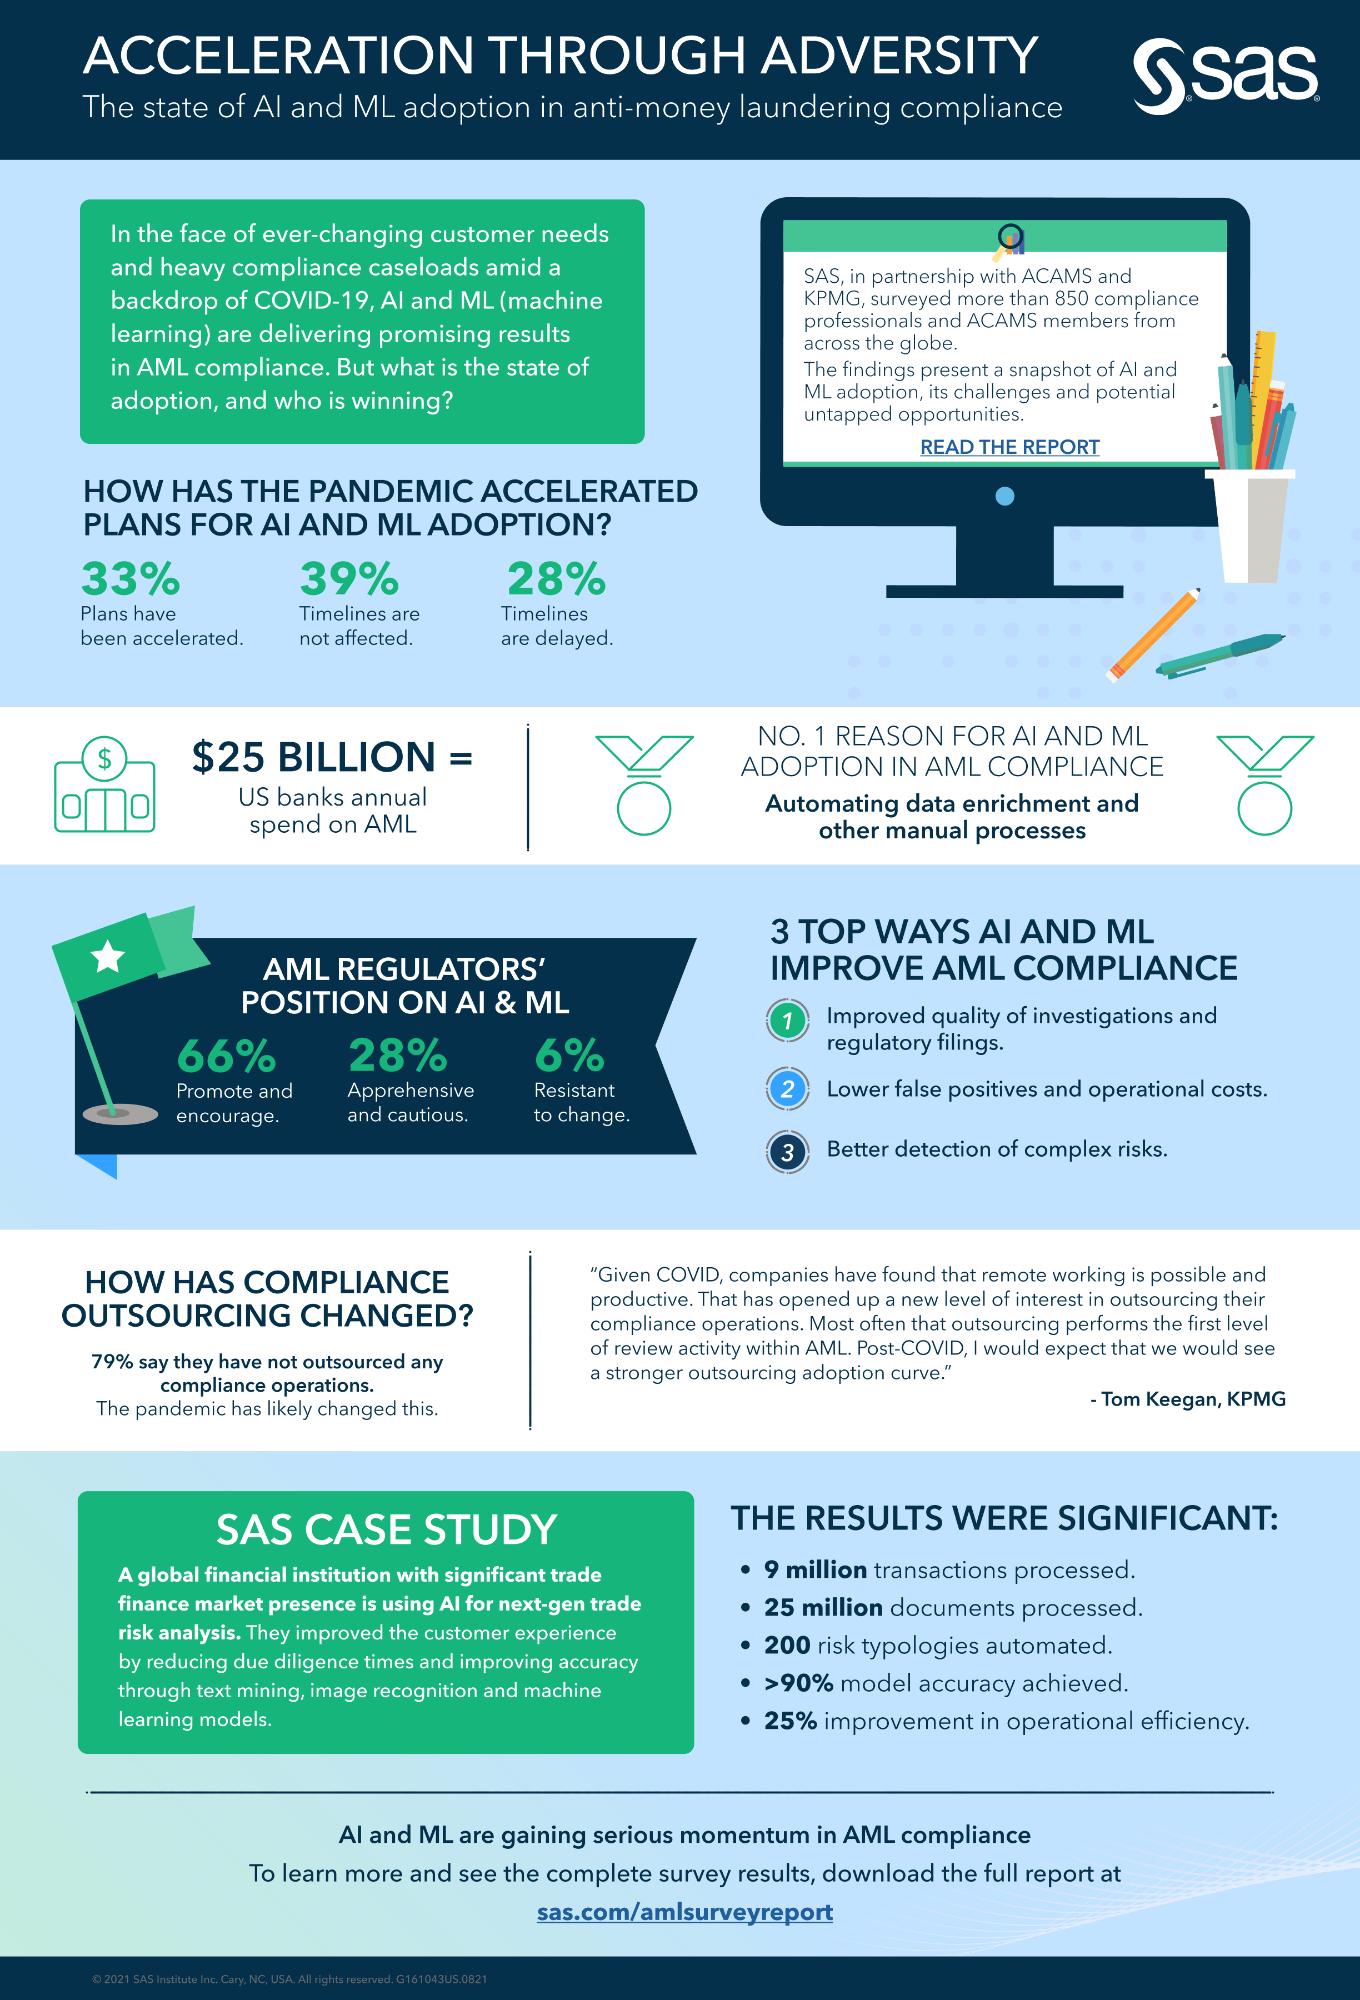 Infographic | Key Findings from Acceleration Through Adversity, a global AML technology study by ACAMS, KPMG and SAS